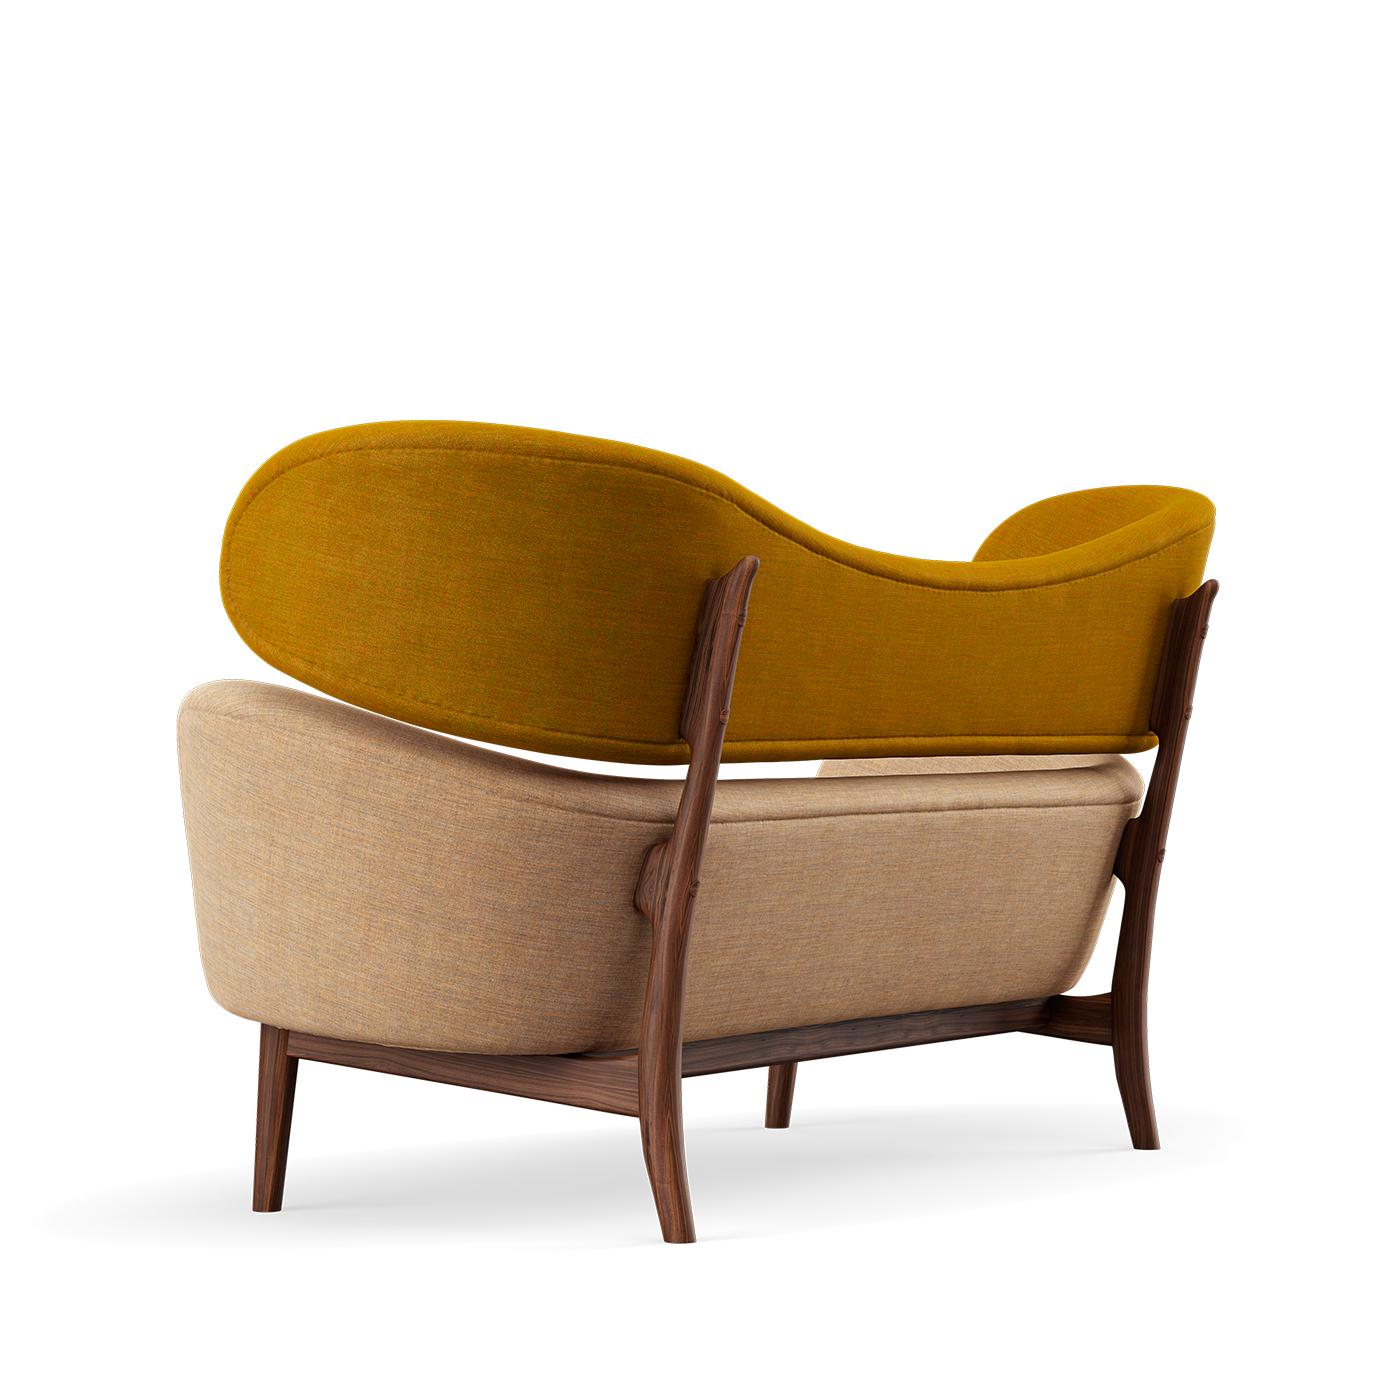 Sofa designed by Finn Juhl in 1951, relaunched in 2009.
Manufactured by House of Finn Juhl in Denmark.

Walnut wood upholstered with Remix 412-242 fabrics.

Edgar Kaufmann Jr., a prolific art collector and director of the Industrial Design